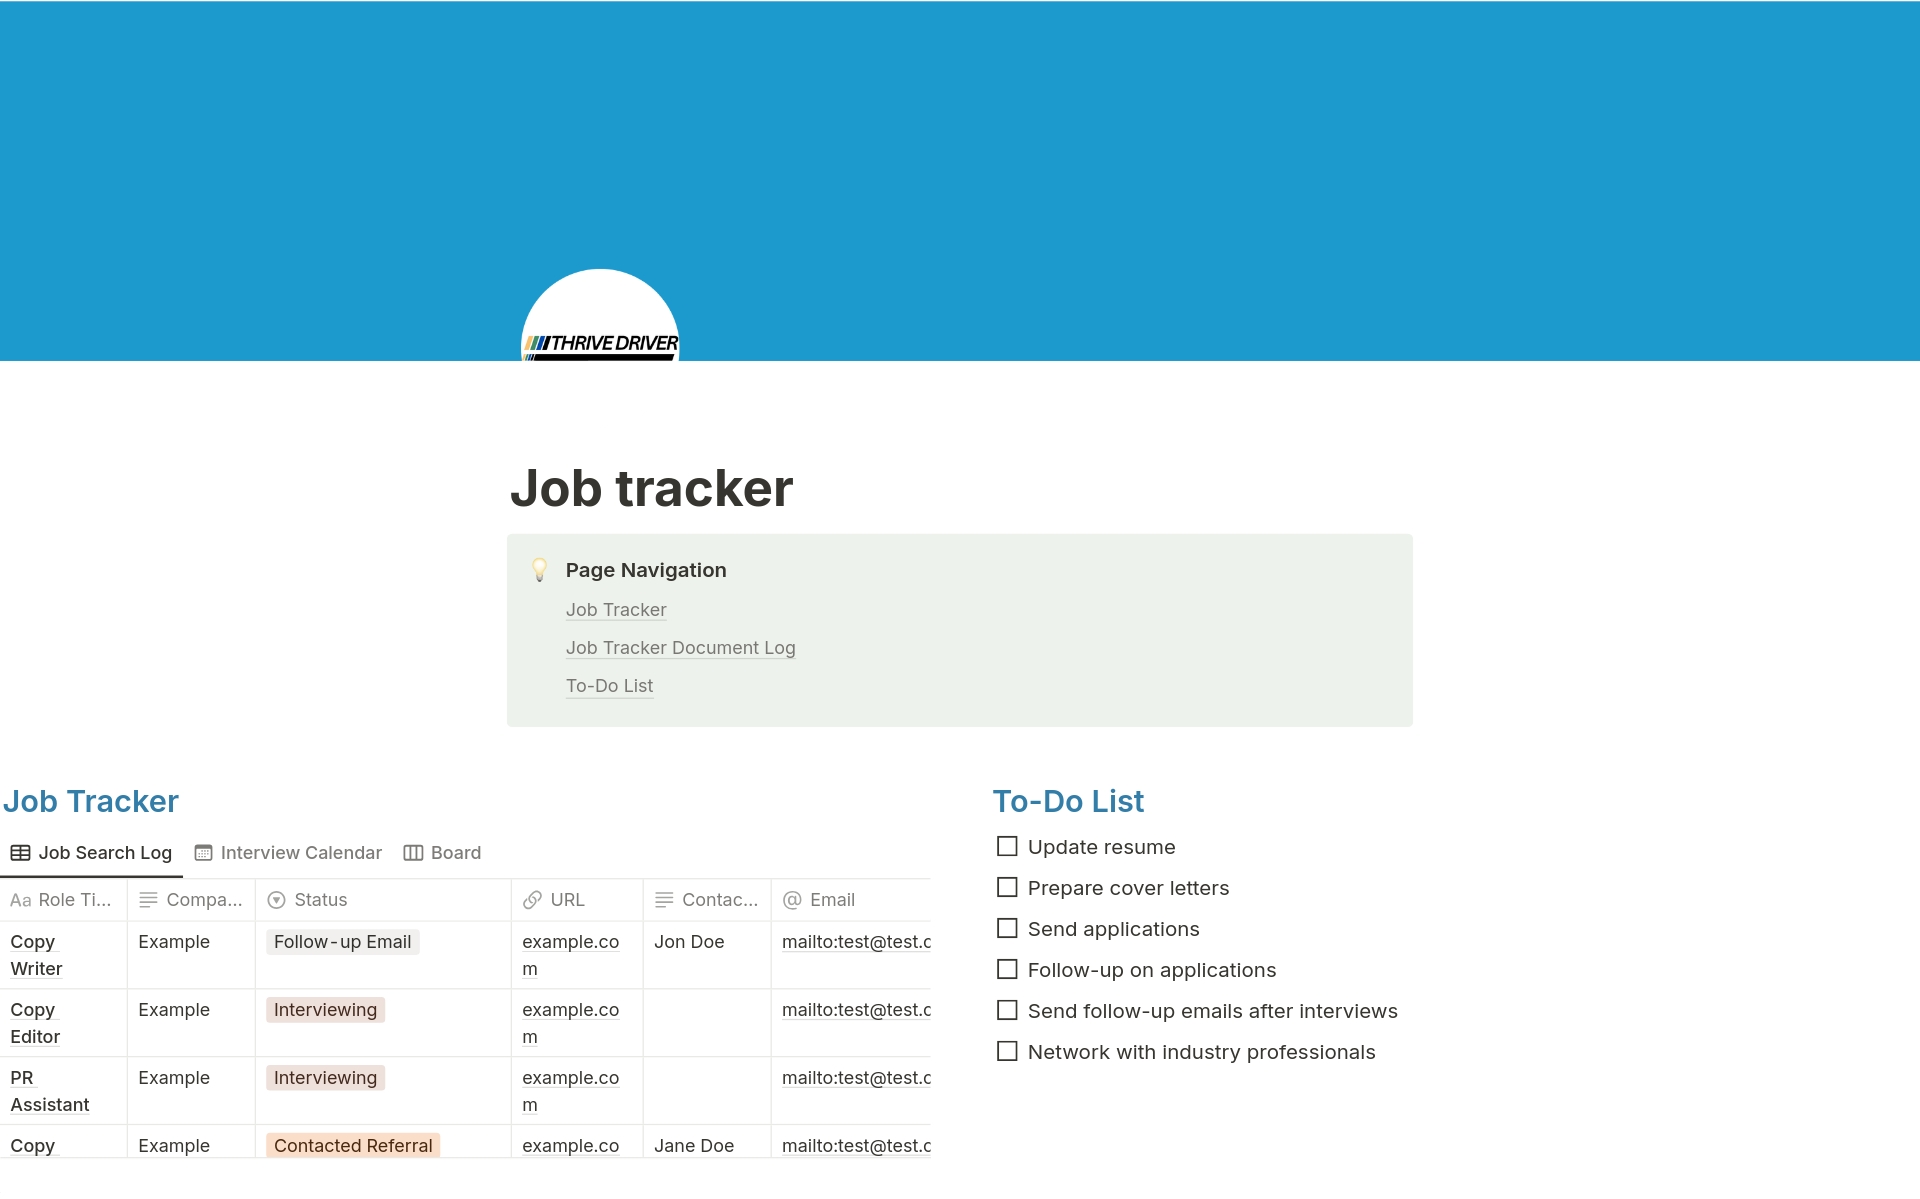 Simplify your job search with this template. It includes sections for tracking job applications, managing documents, and organizing tasks like resume updates and networking. Stay focused and efficient as you navigate your career 